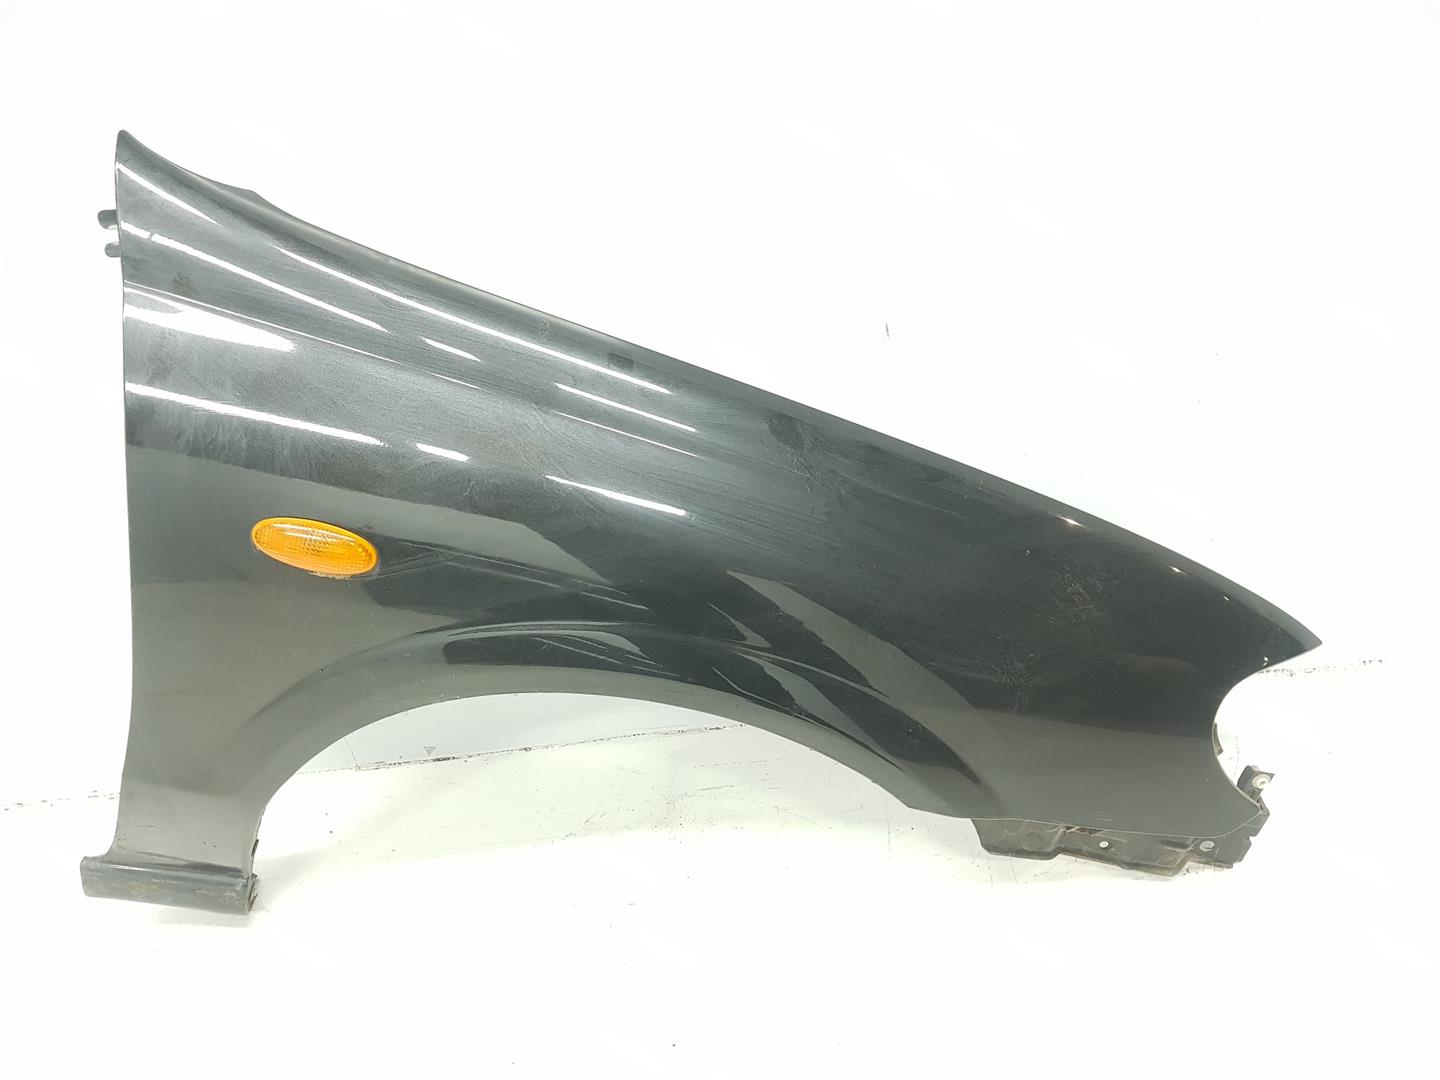 NISSAN Almera N16 (2000-2006) Front Right Fender 631004M630, 631004M630, COLORNEGROZ11 21365010